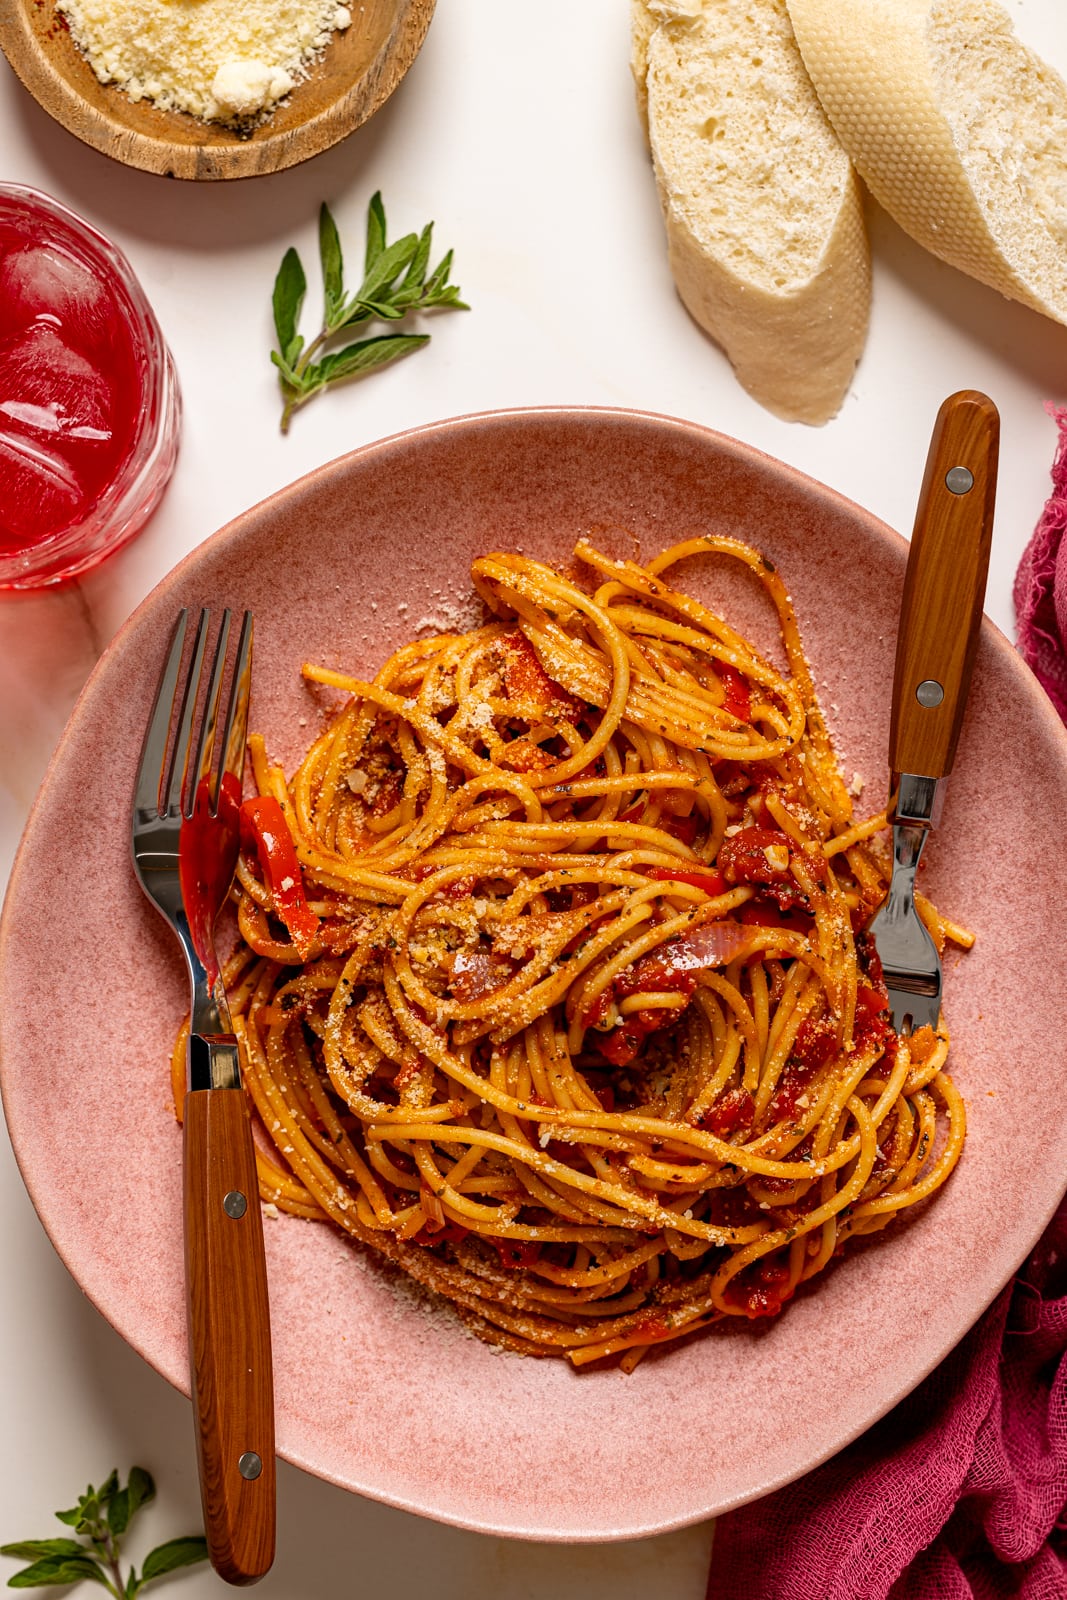 Spaghetti on a pink plate with two forks and a side of bread.